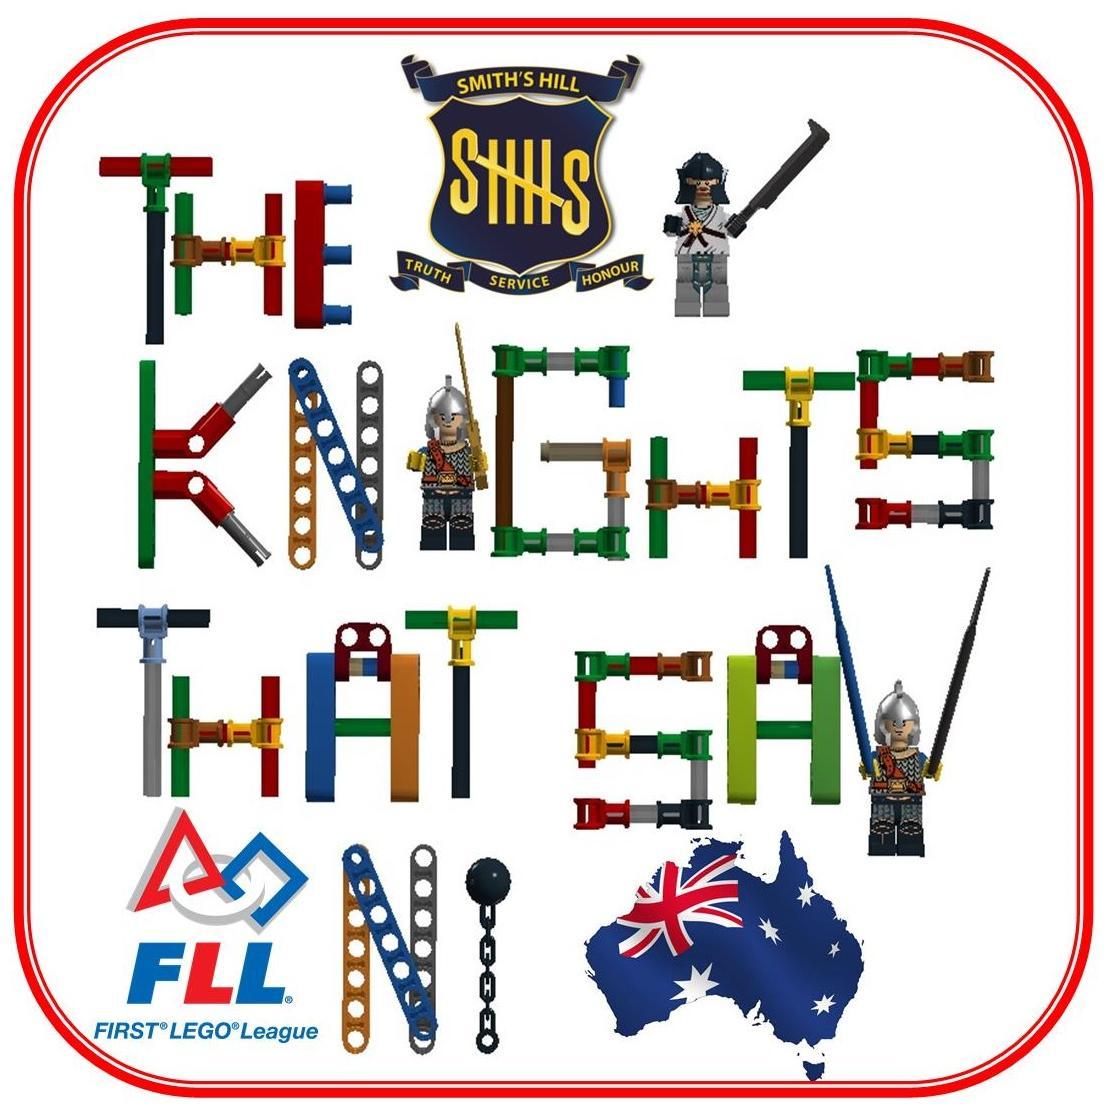 The Knights That Say Ni is a Wollongong Based FIRST LEGO League Team https://t.co/gGjbSaWmtS Instagram: FLL_TKTSN